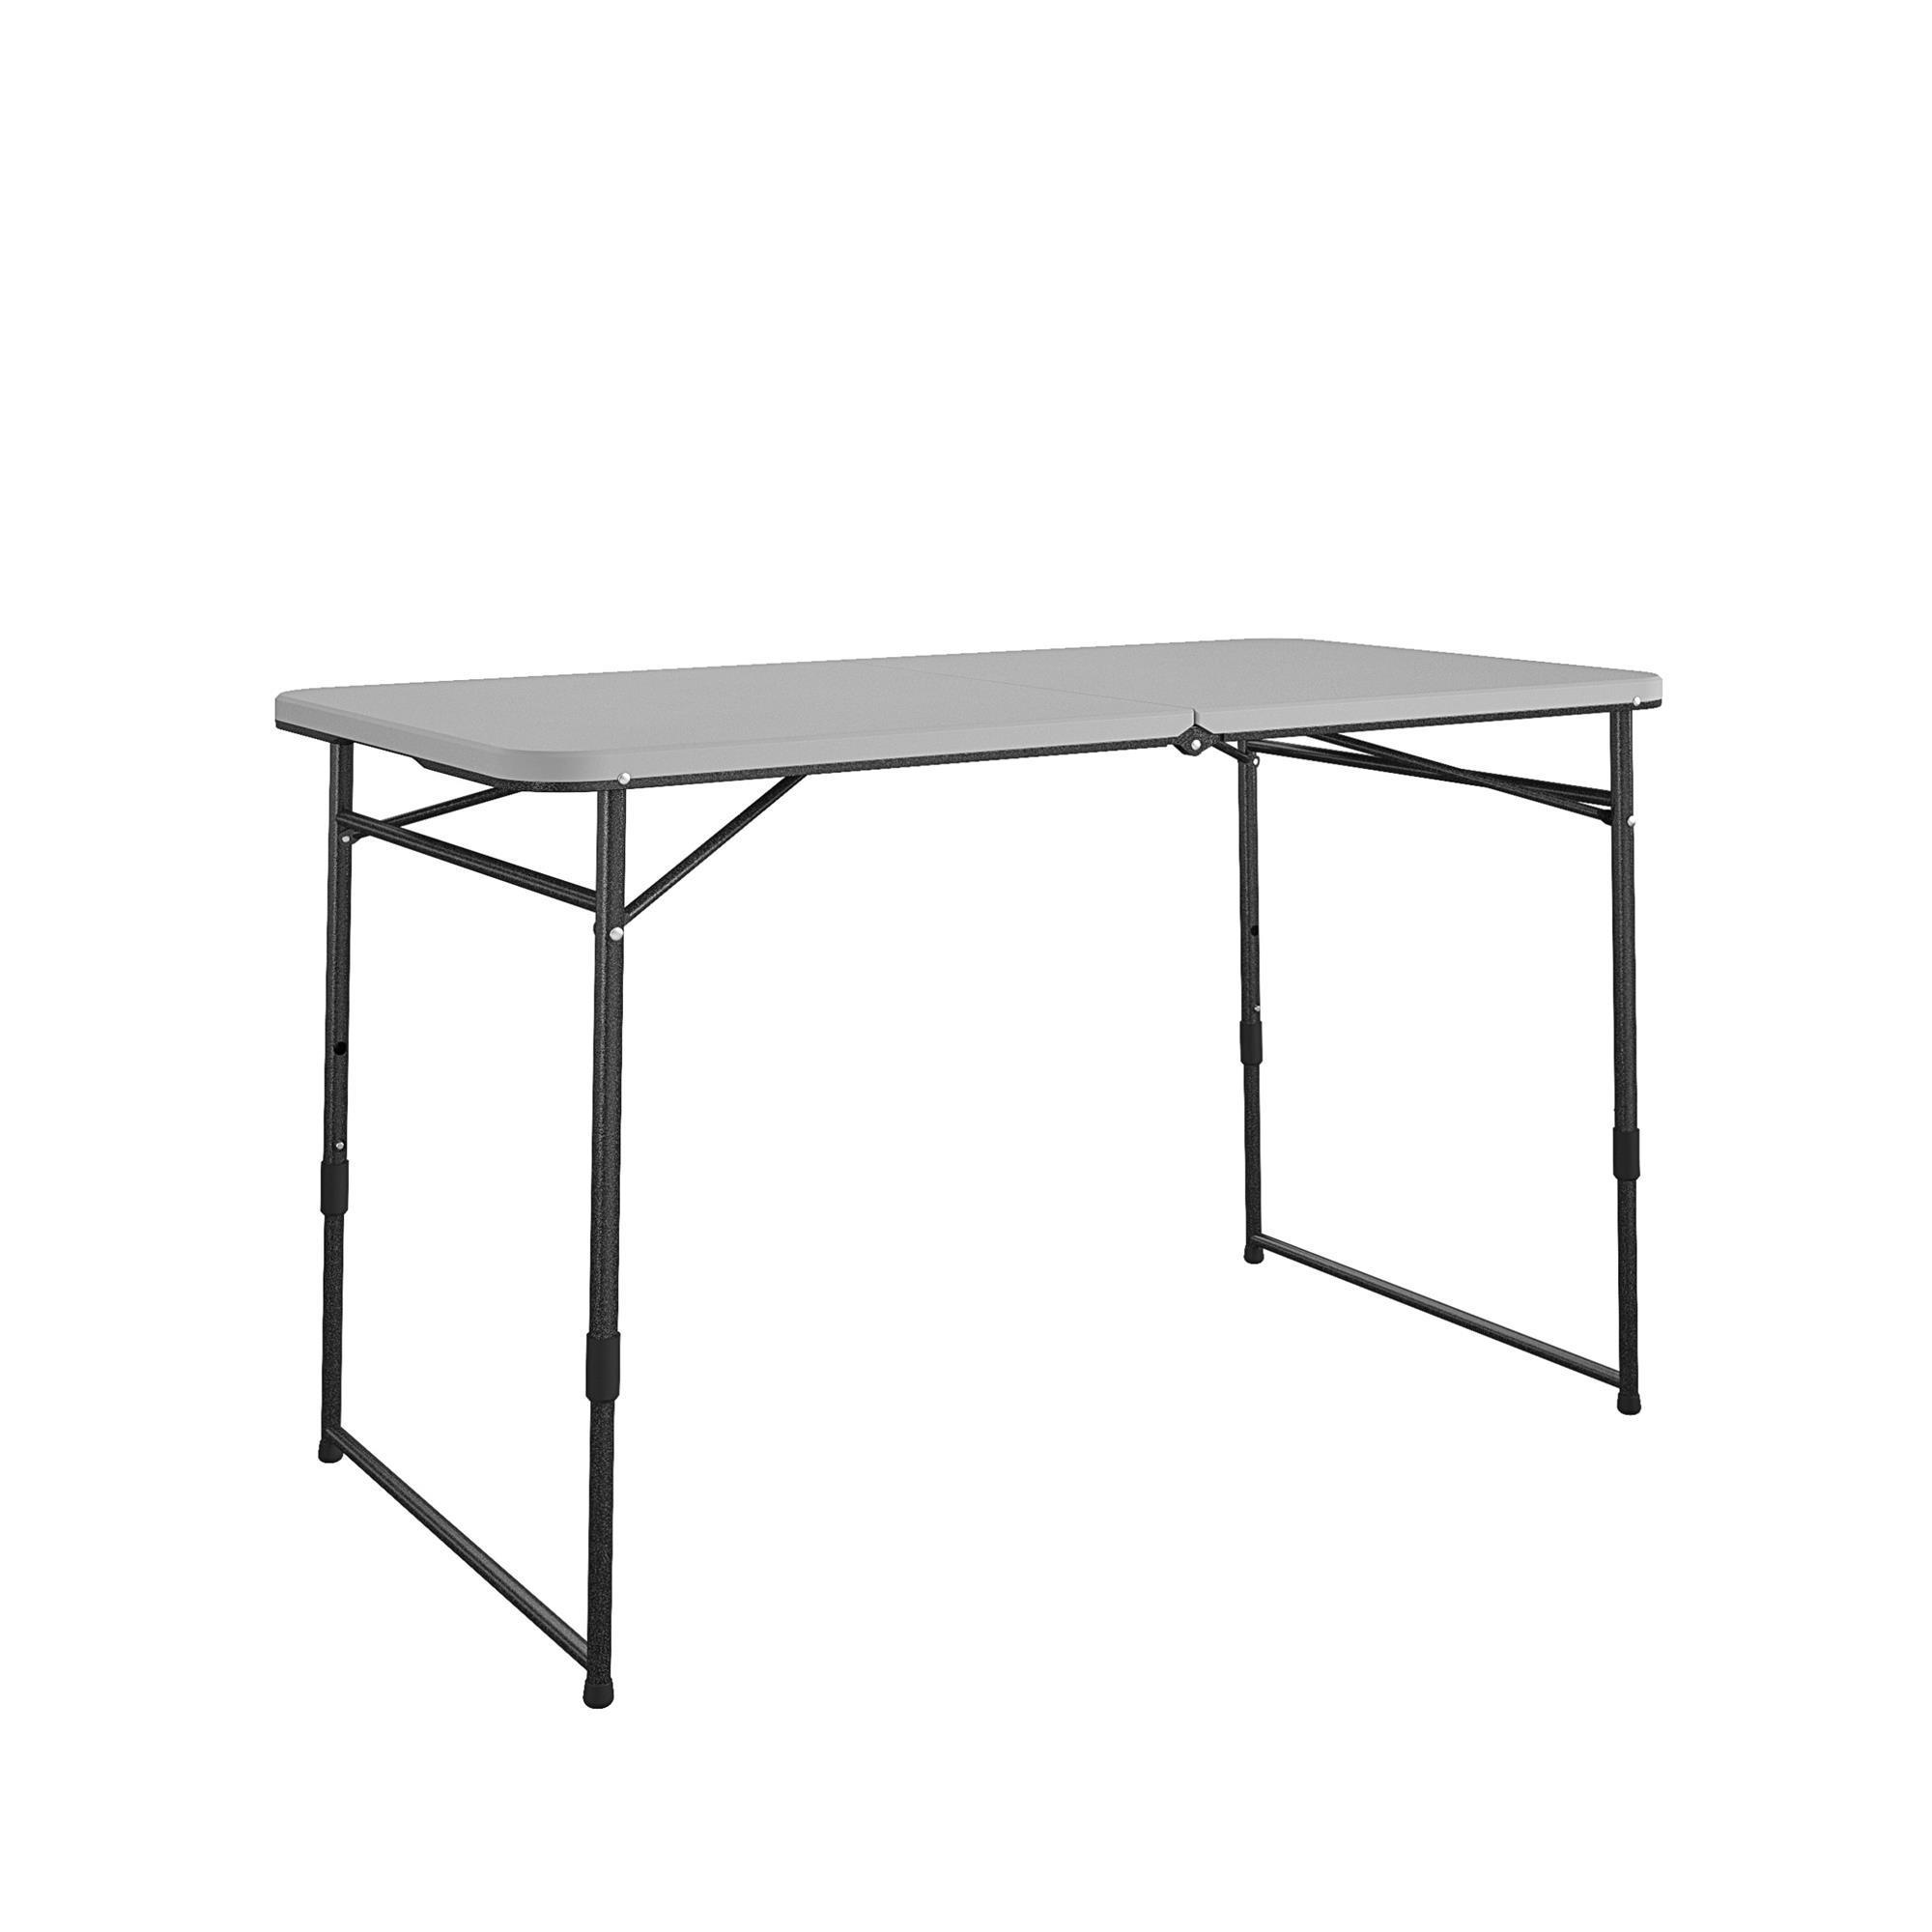 Cosco, 4ft. Fold-in-Half Indoor/Outdoor Utility Table, Height 27.99 in, Width 24.01 in, Length 48.03 in, Model 14400GRY1E